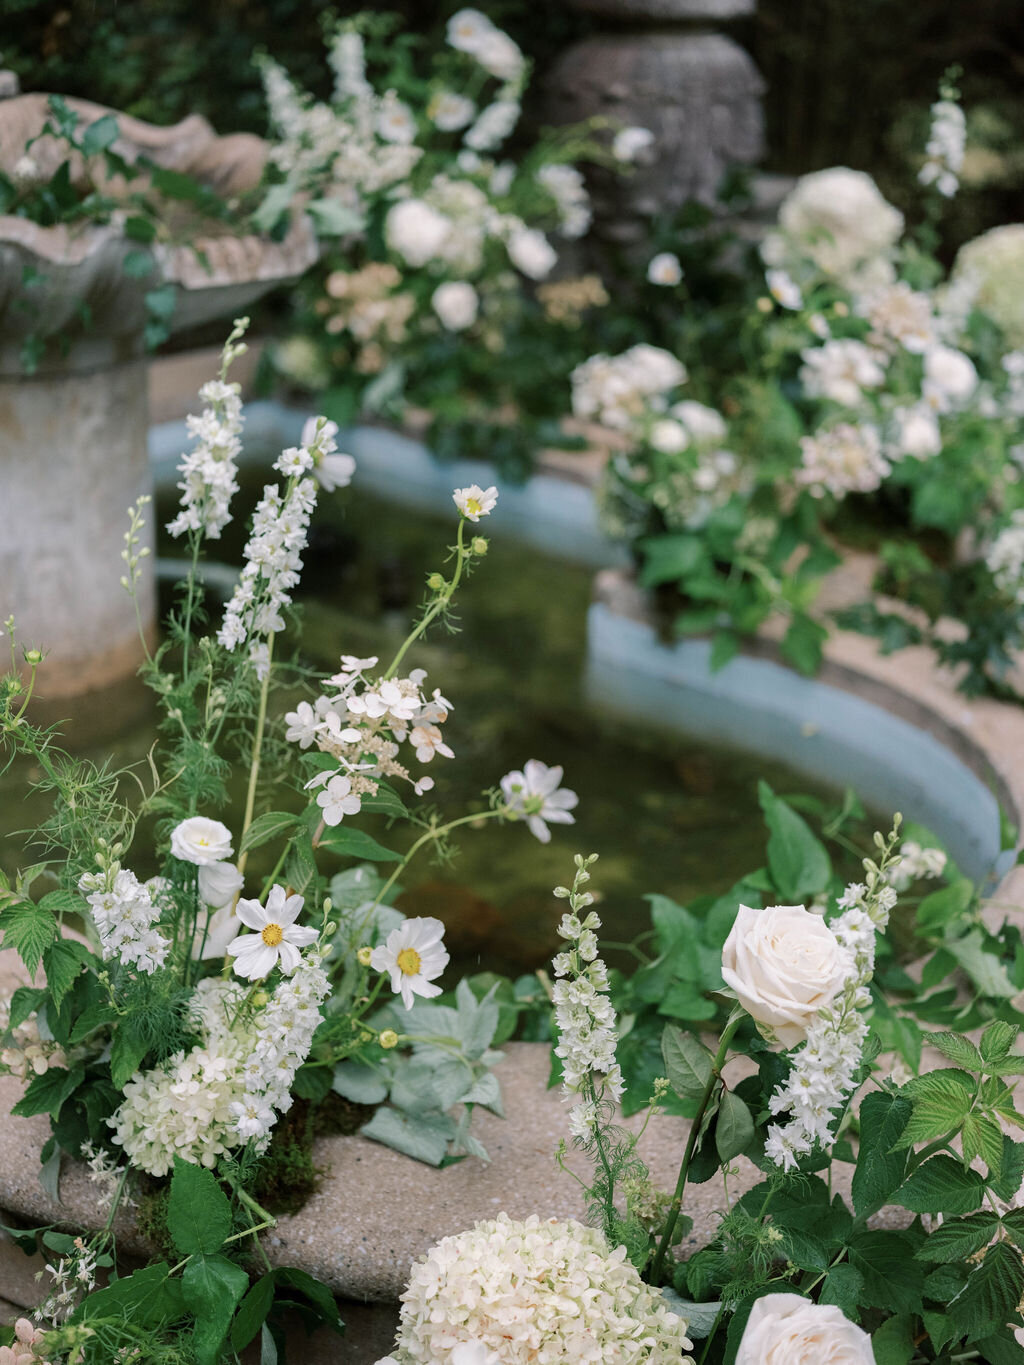 Florals covering water fountain at the Evergreen Museum ceremony include white larkspur, white quick-fire hydrangea, white Japanese anemone, white lisianthus, white garden roses and lush organic greenery.